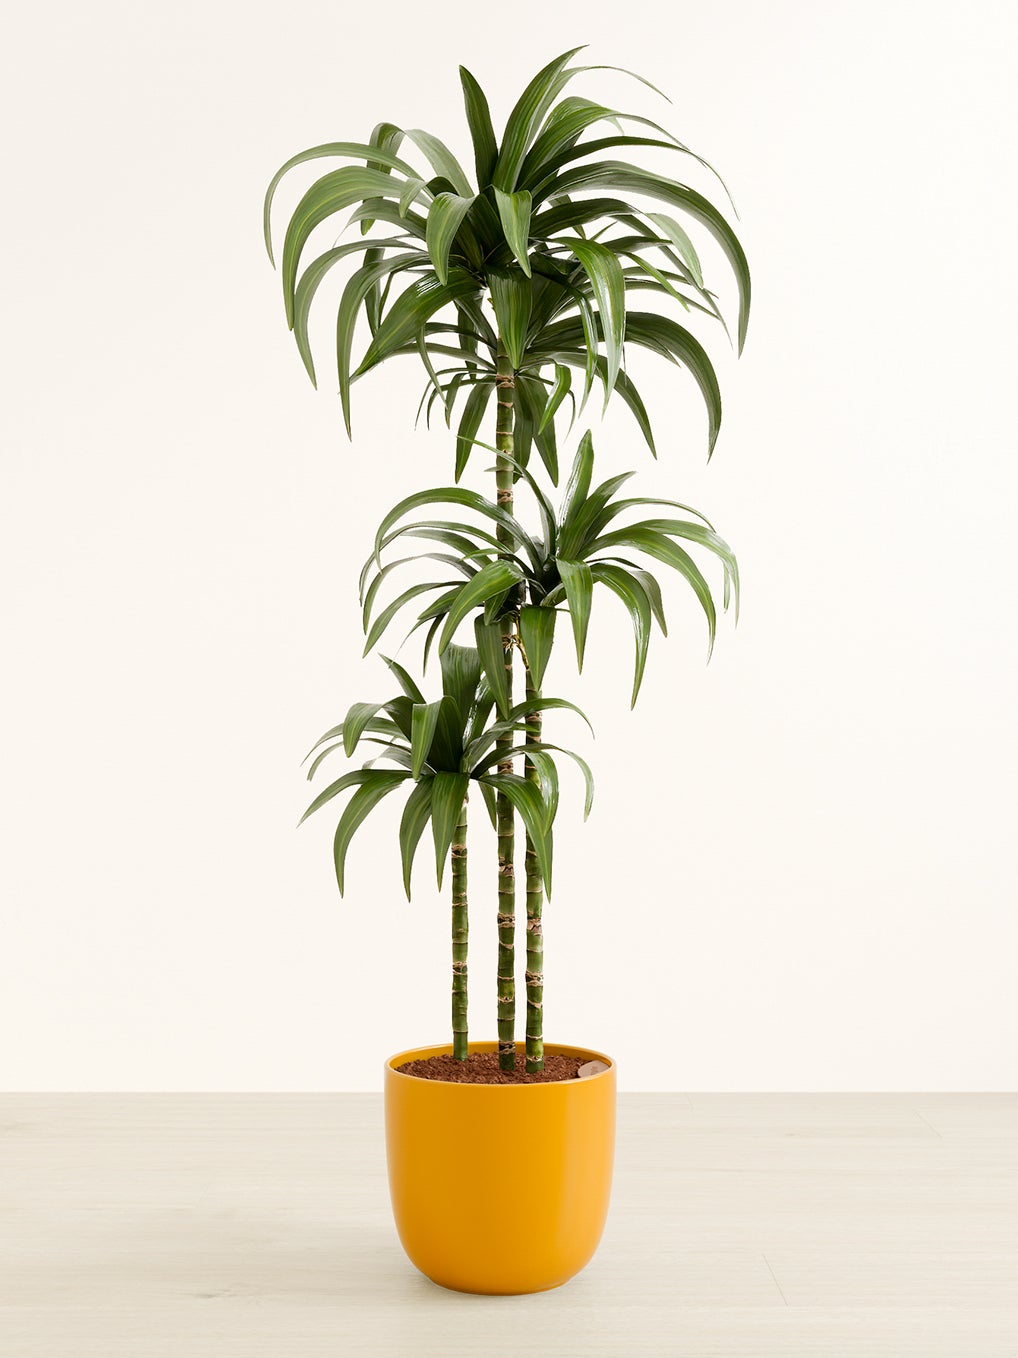 A dracaena janet craig plant in a yellow pot